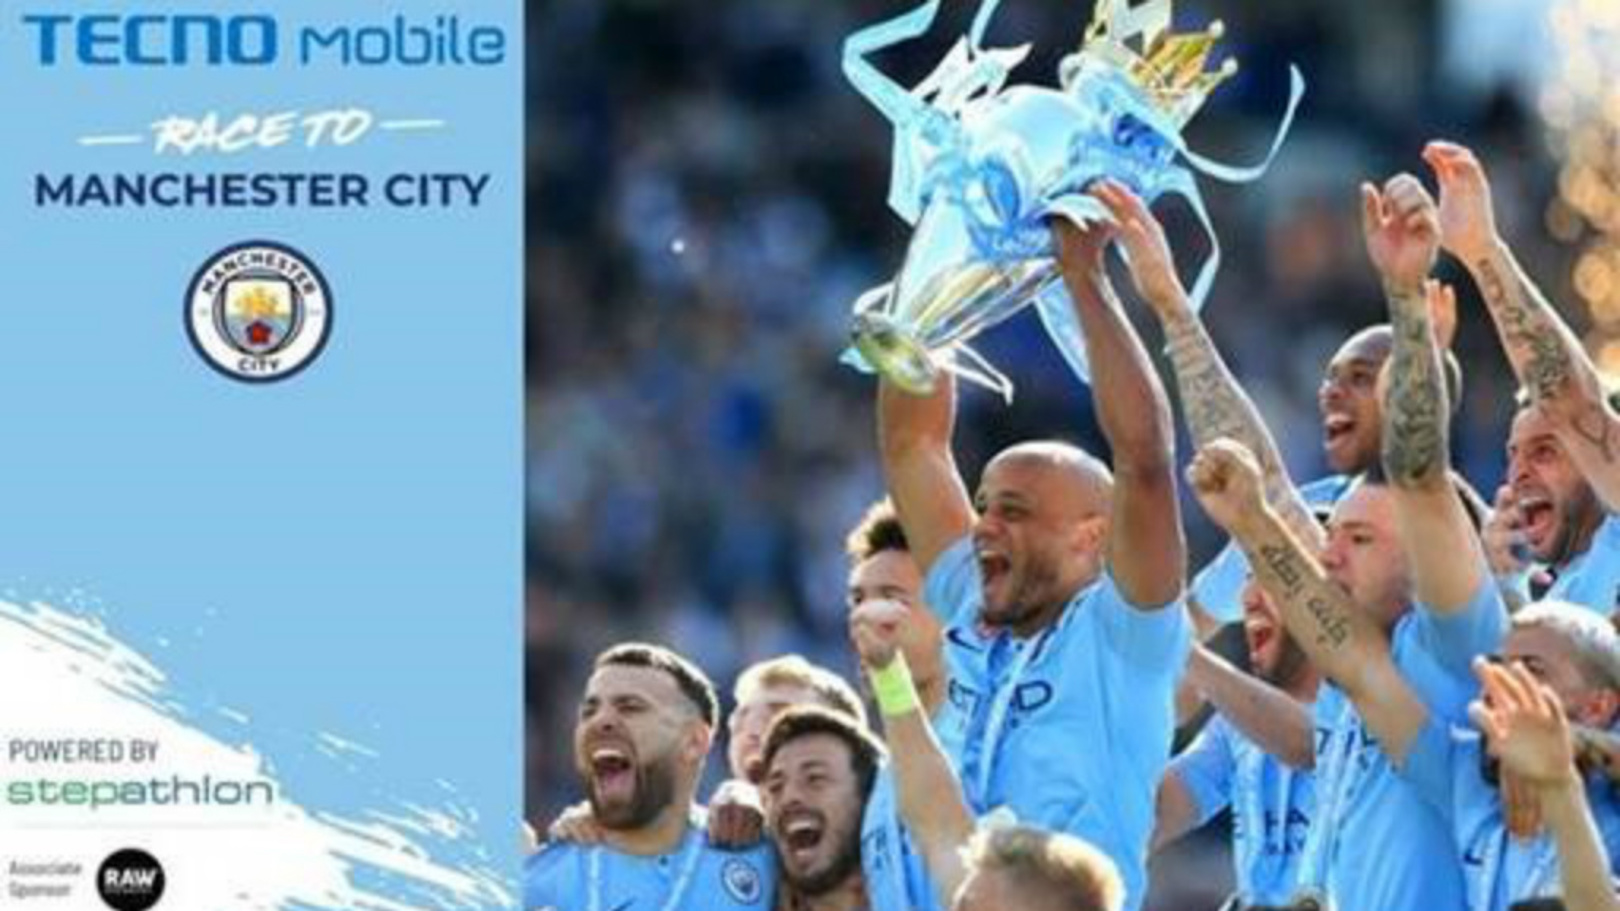 Tecno Race to Manchester City launches